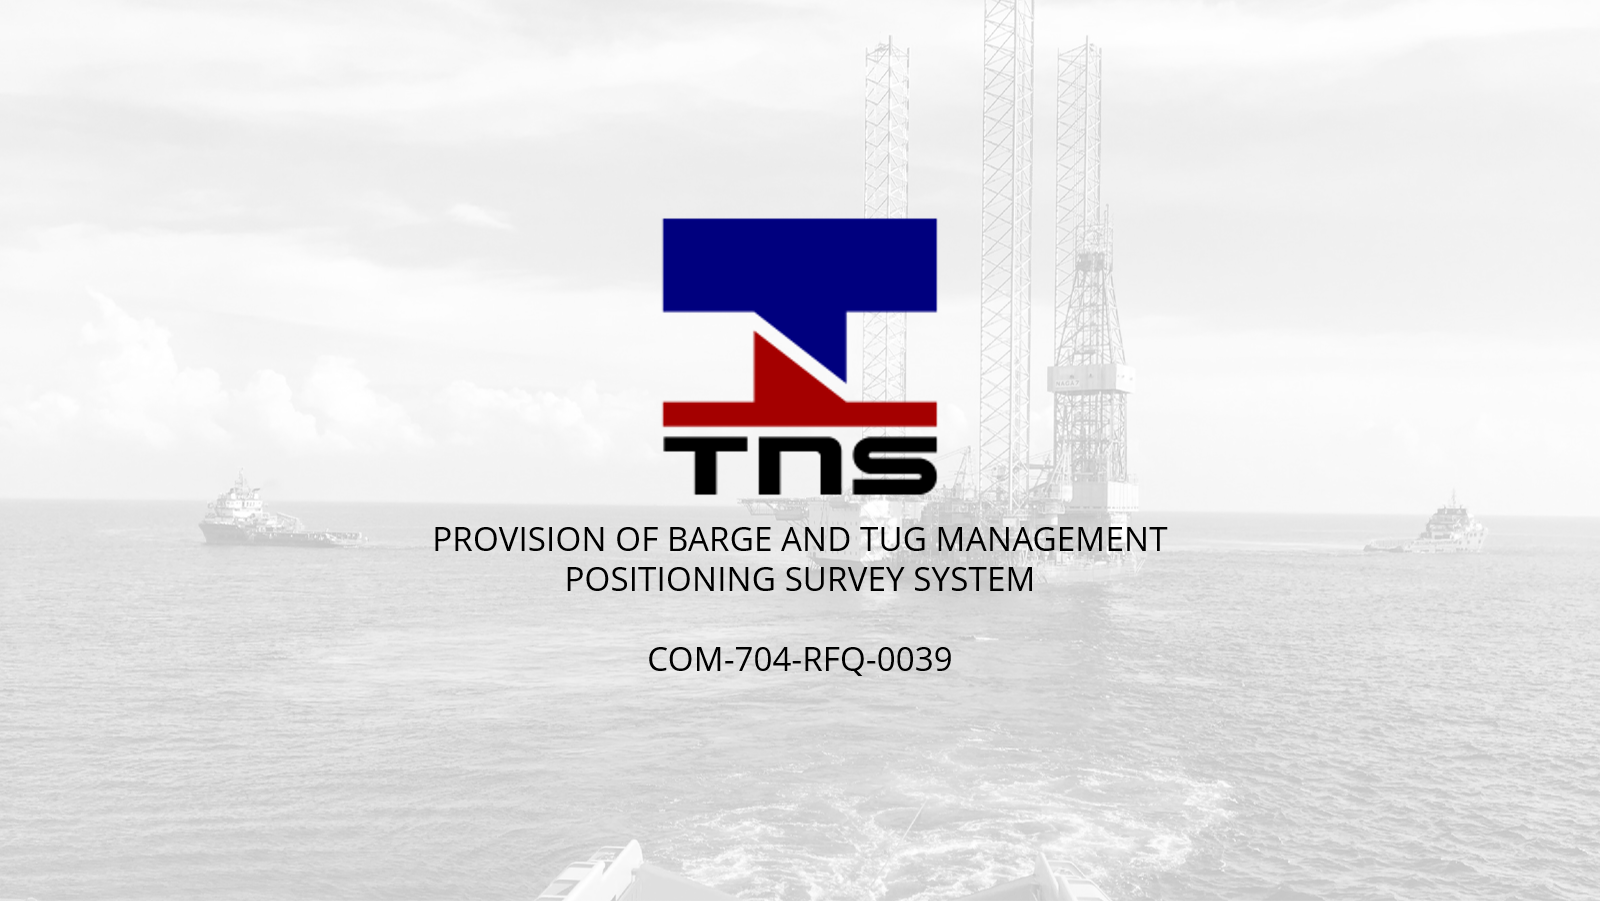 Provision of Barge and Tug Management Positioning Survey System for Thai Nippon Steel Engineering & Construction Corporation Ltd. (Thailand)